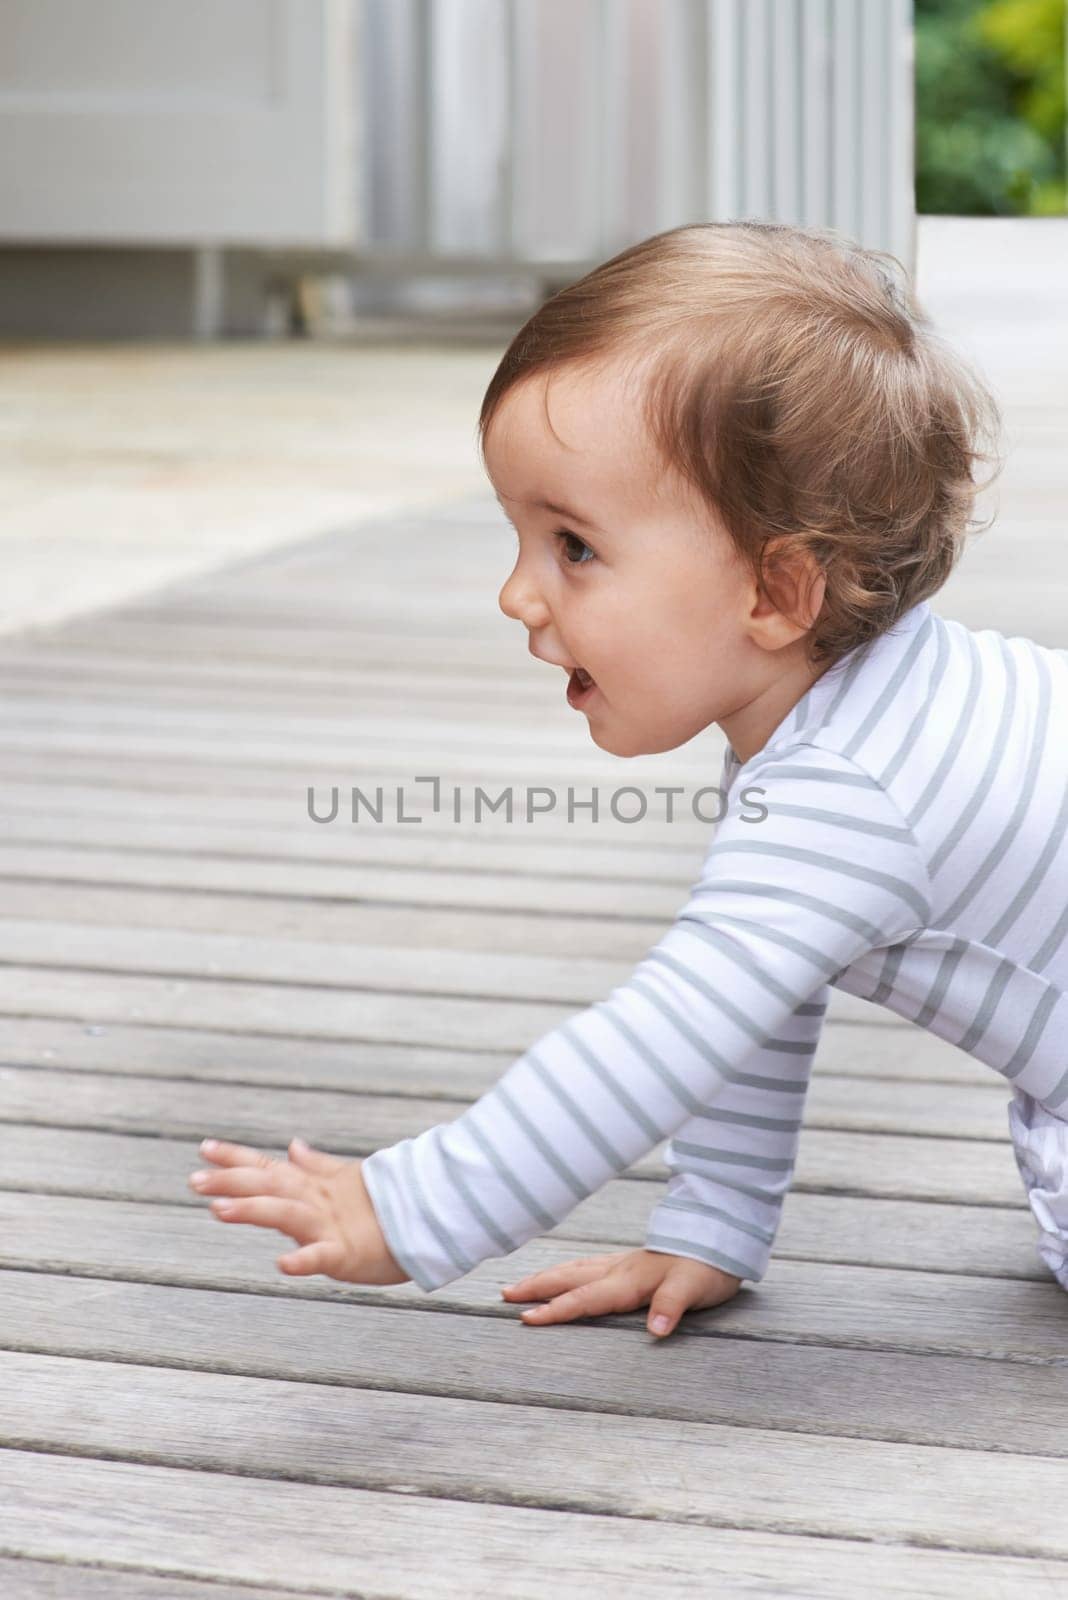 Baby, crawling outdoor and happy on floor, child development and growth with sensory, coordination and home. Girl, playing and healthy in good mood, childhood or balance with arms, kid or curious.